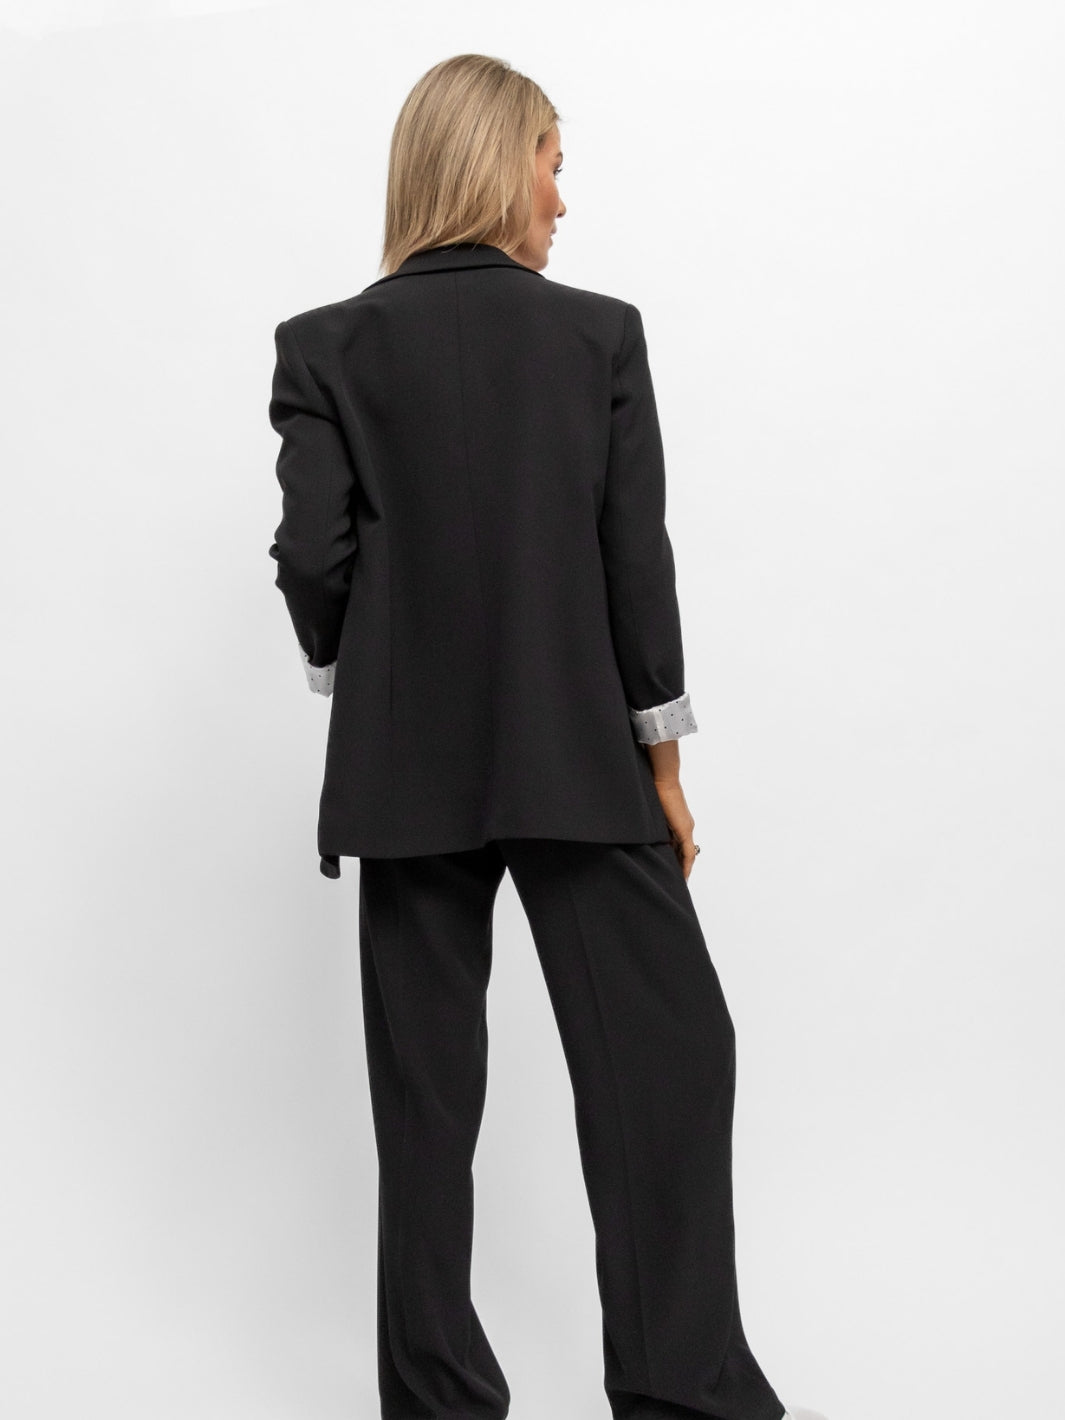 Italian Collection Jacket The Italian Collection Tailored Jacket in Black